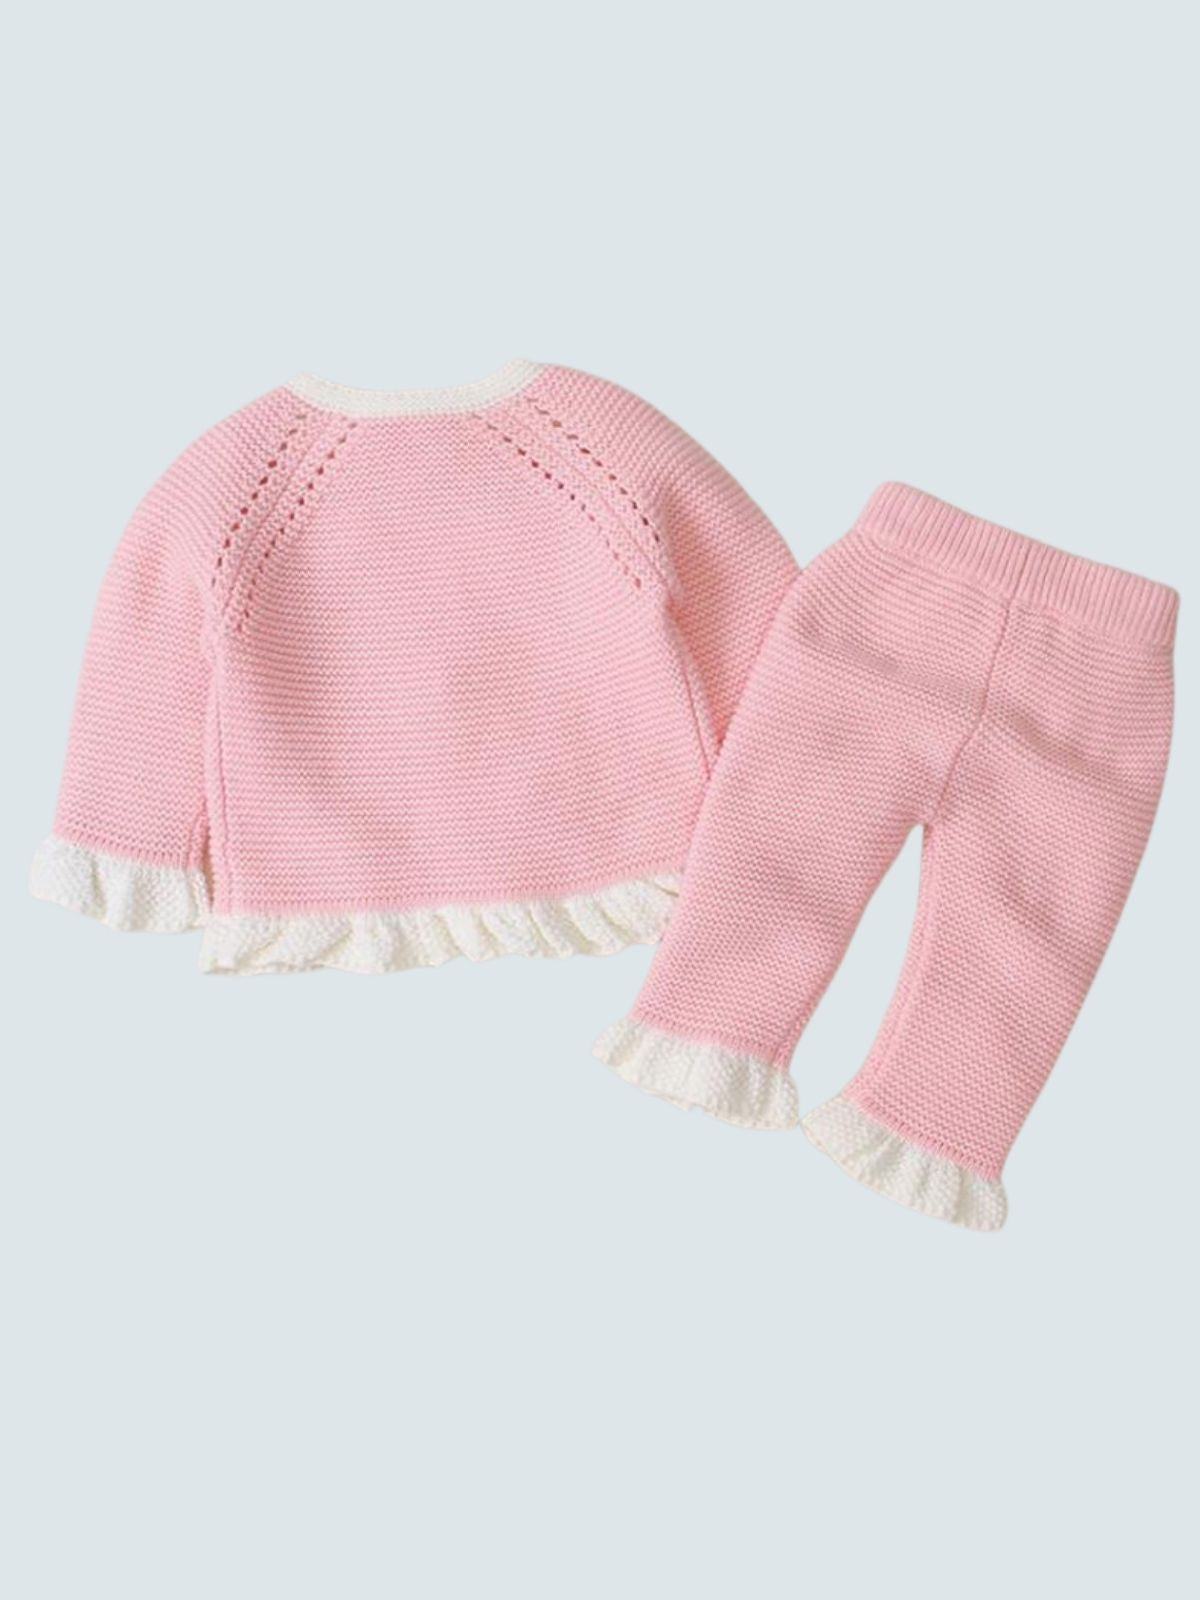 Baby "You're the Knit Girl" Ruffle Long Sleeve Sweater and Pants Set Pink